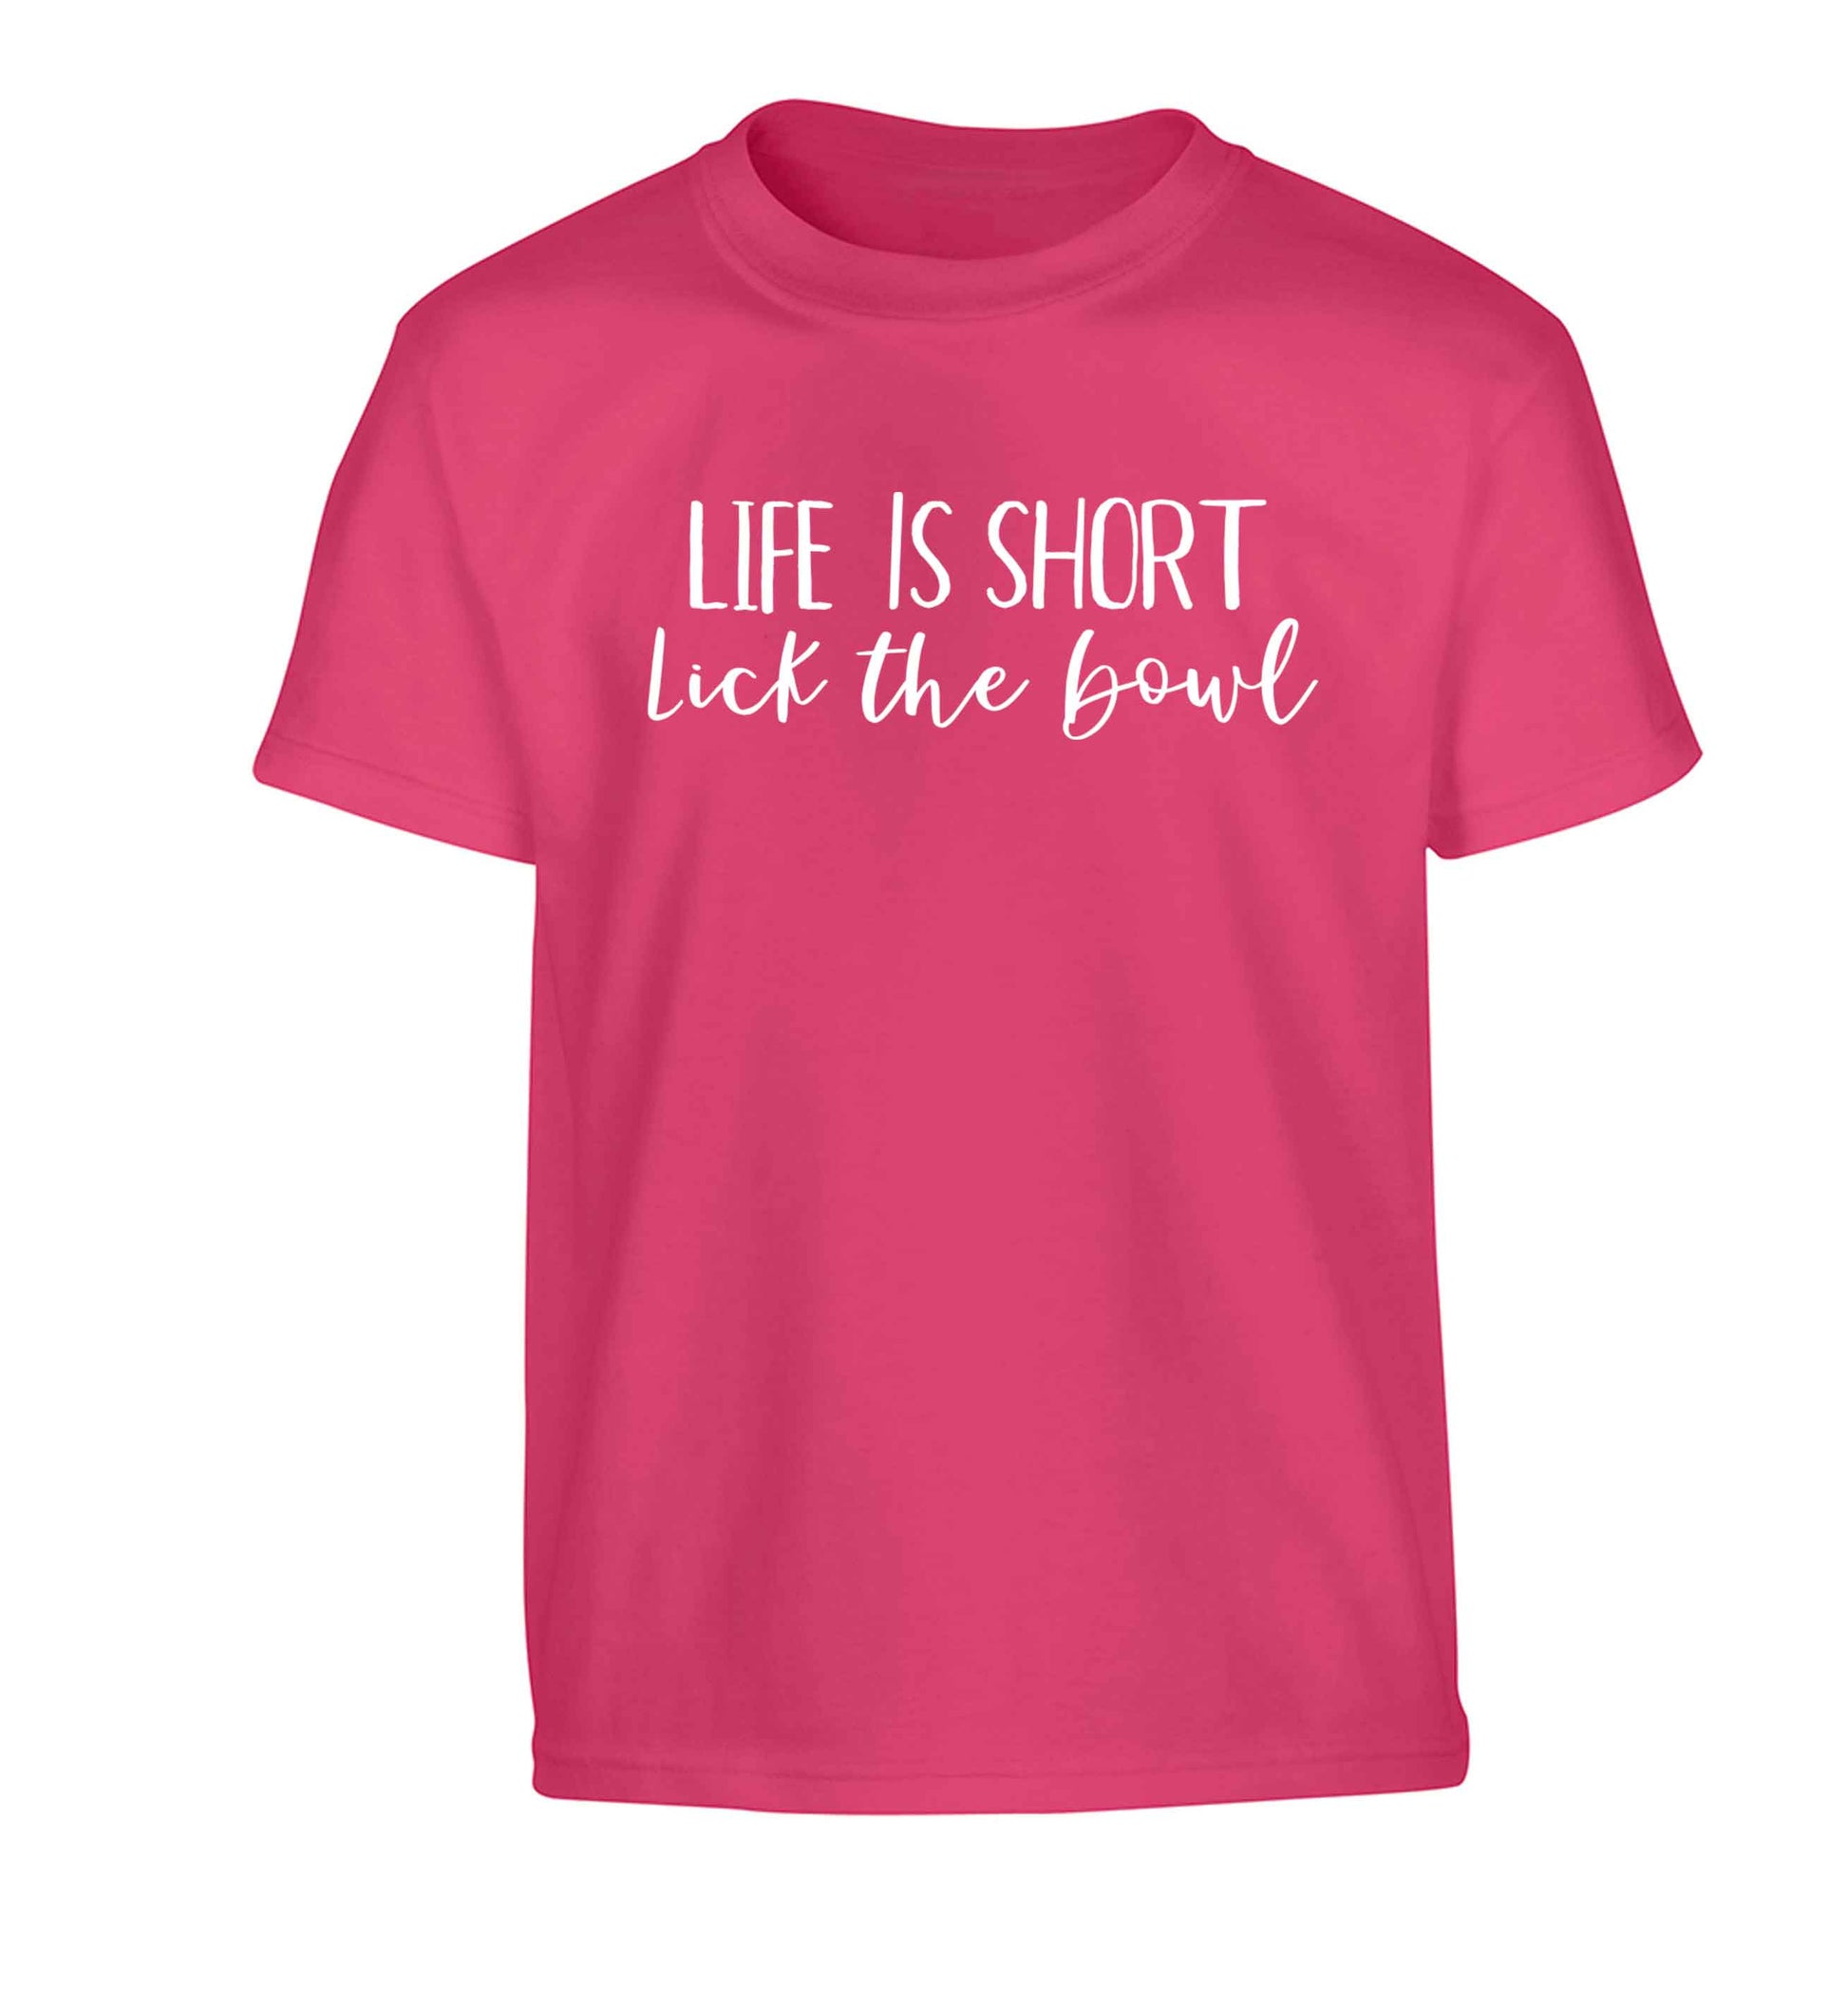 Life is short lick the bowl Children's pink Tshirt 12-13 Years